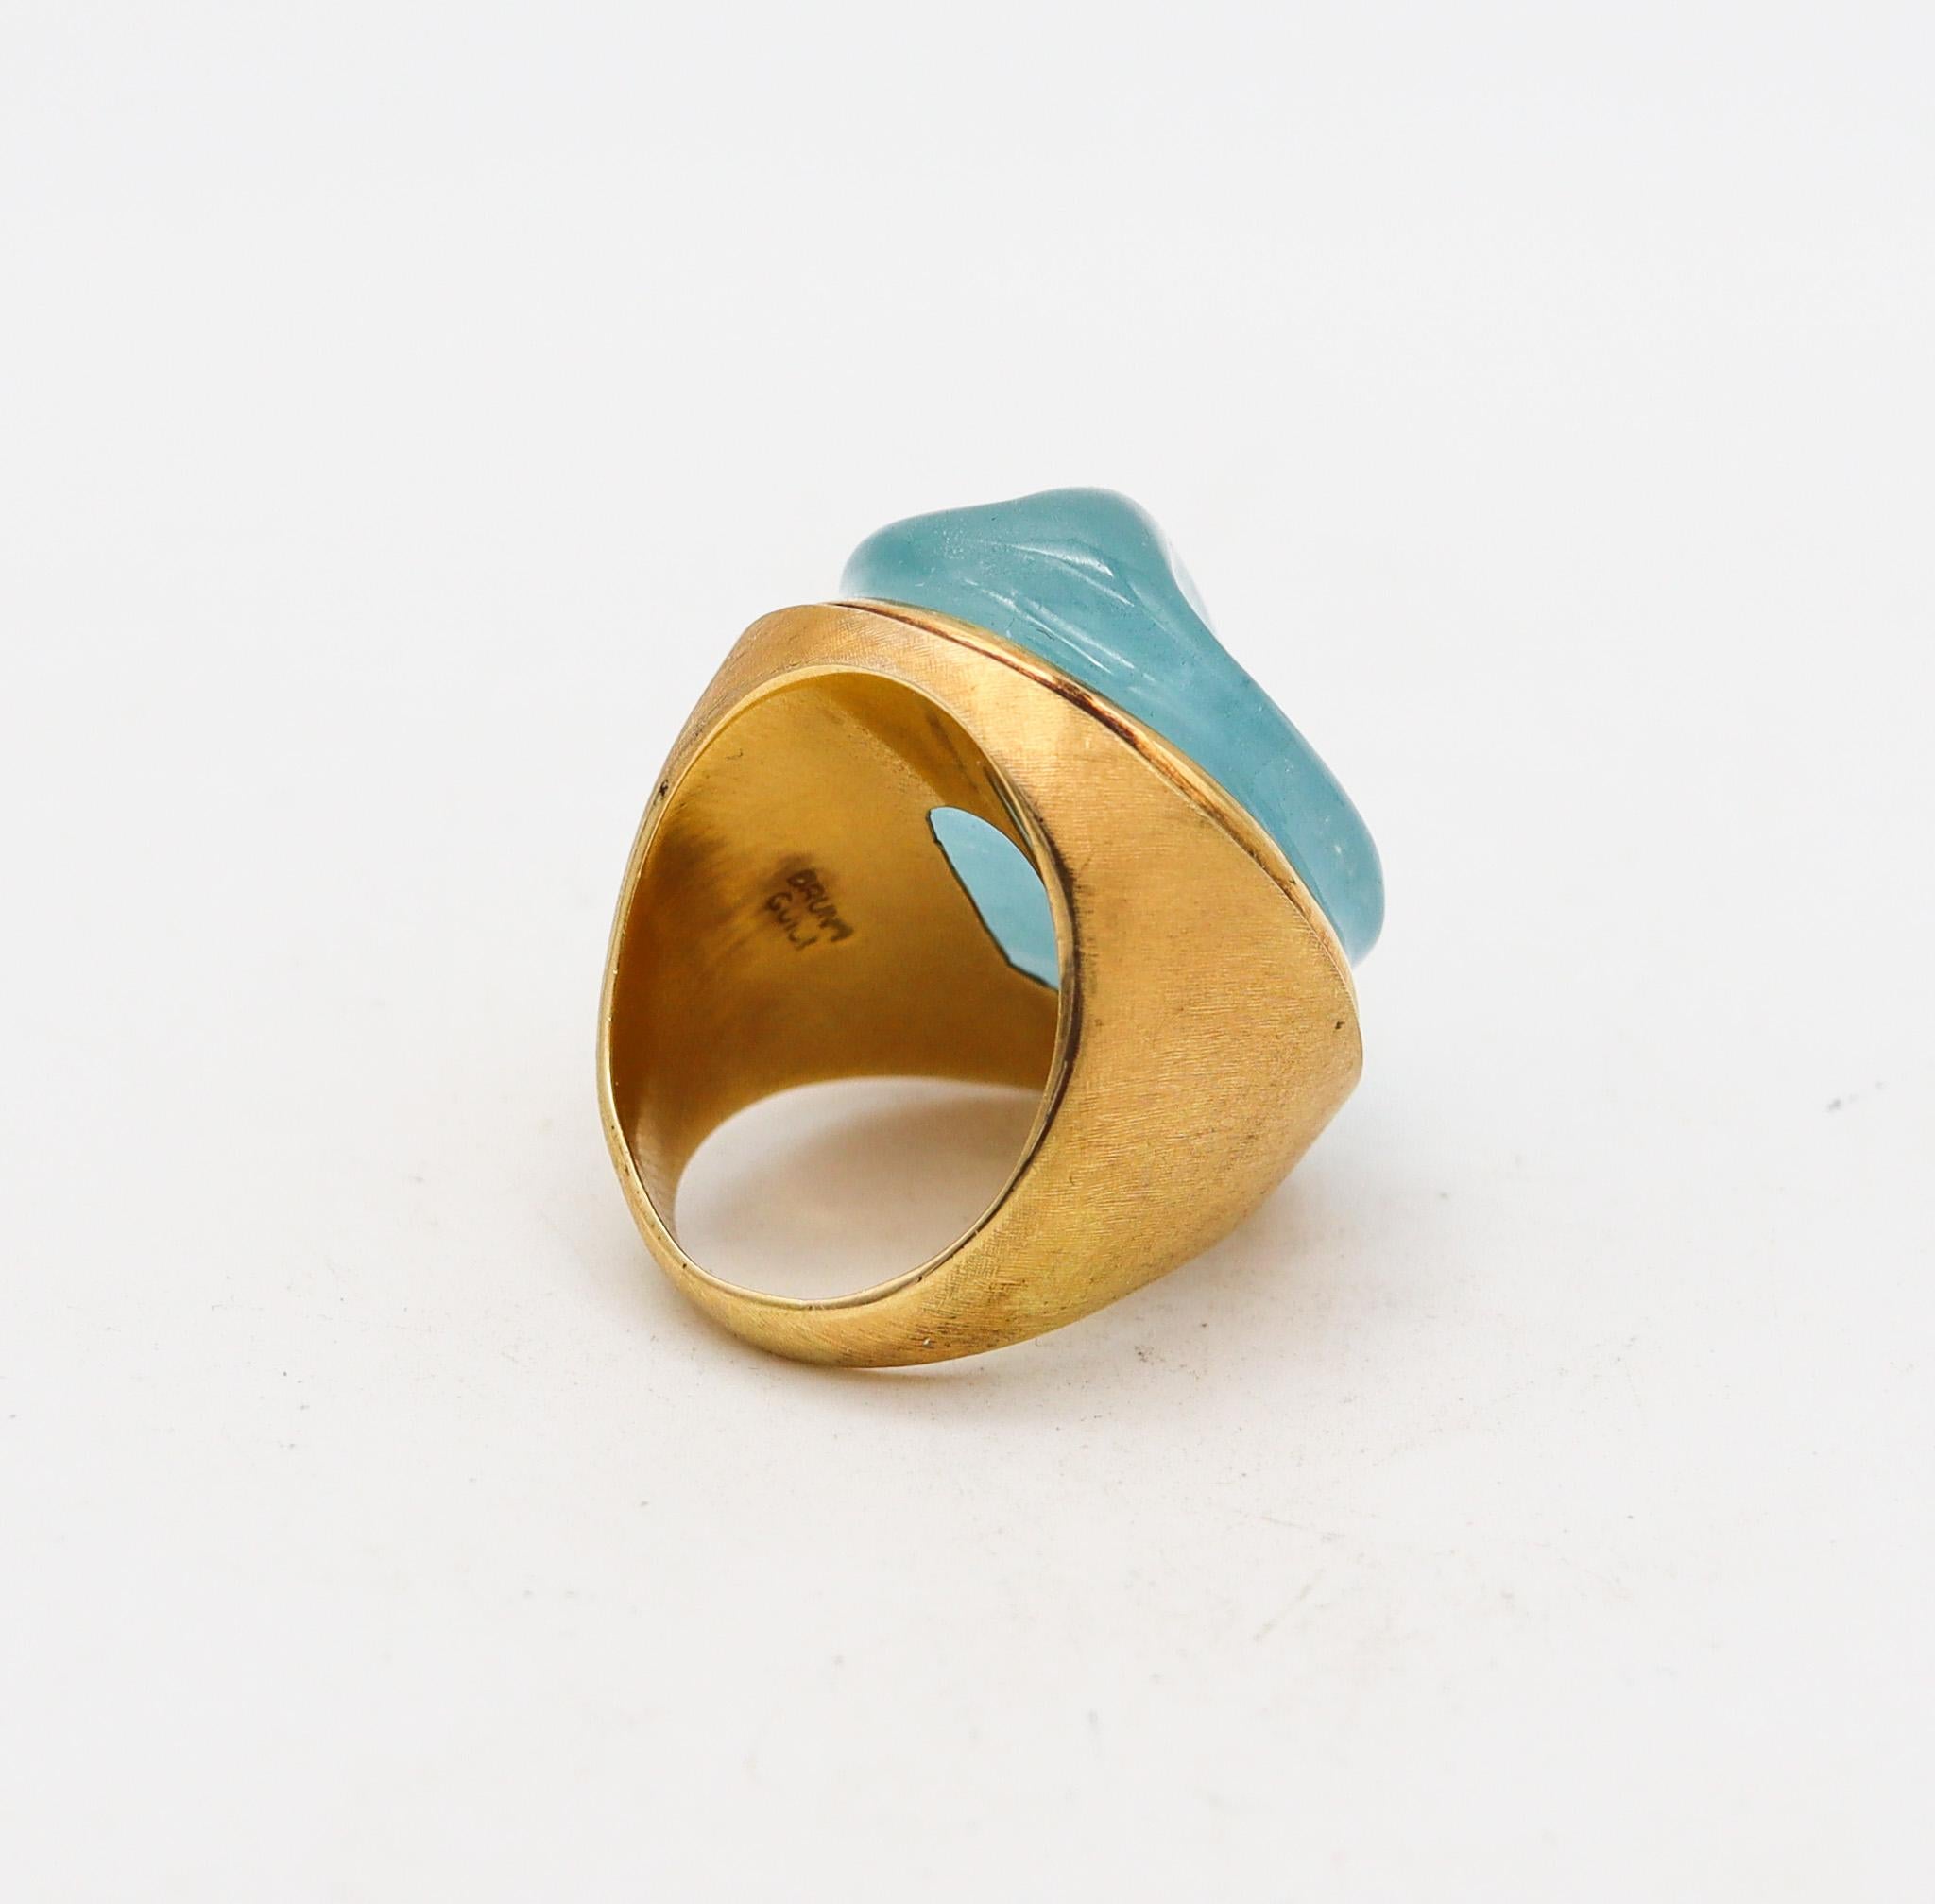 Cabochon Burle Marx Bruno Guidi 1970 Cocktail Ring 18Kt Yellow Gold and 35Cts Aquamarine